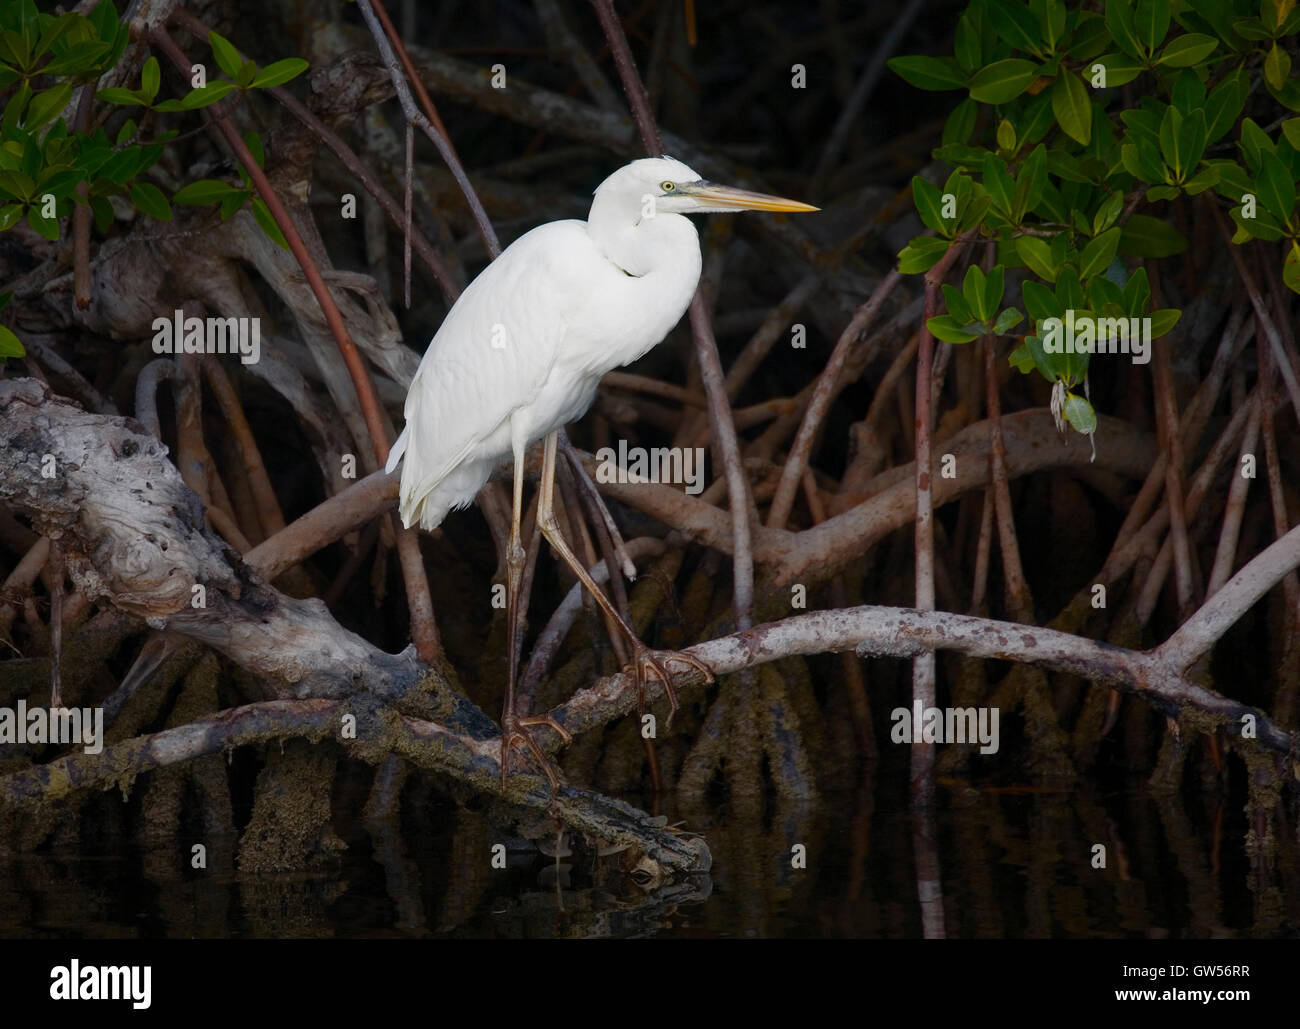 Great White Heron (white morph of the Great Blue Heron) in a mangrove setting perched on the prop roots along  Key Largo Sound. Stock Photo